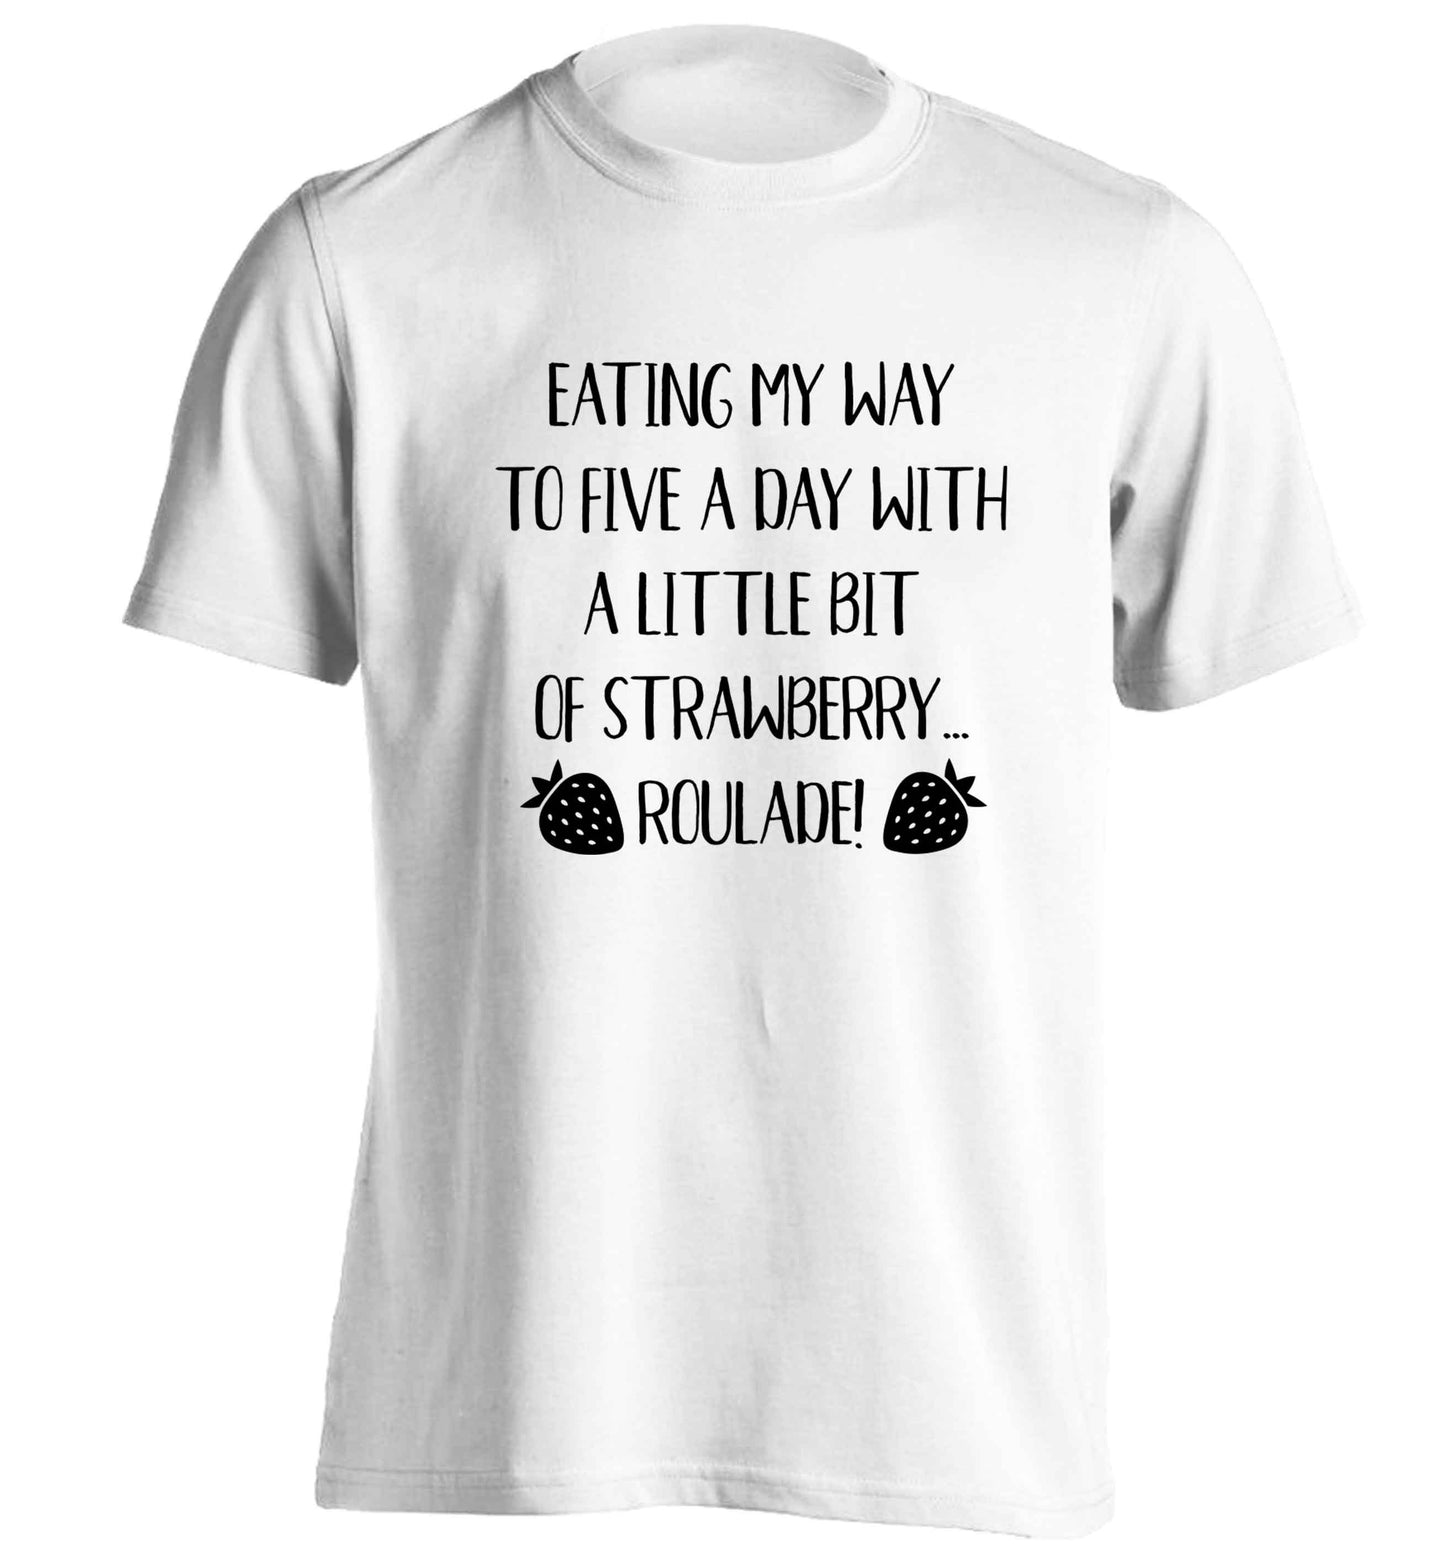 Eating my way to five a day with a little bit of strawberry roulade adults unisex white Tshirt 2XL